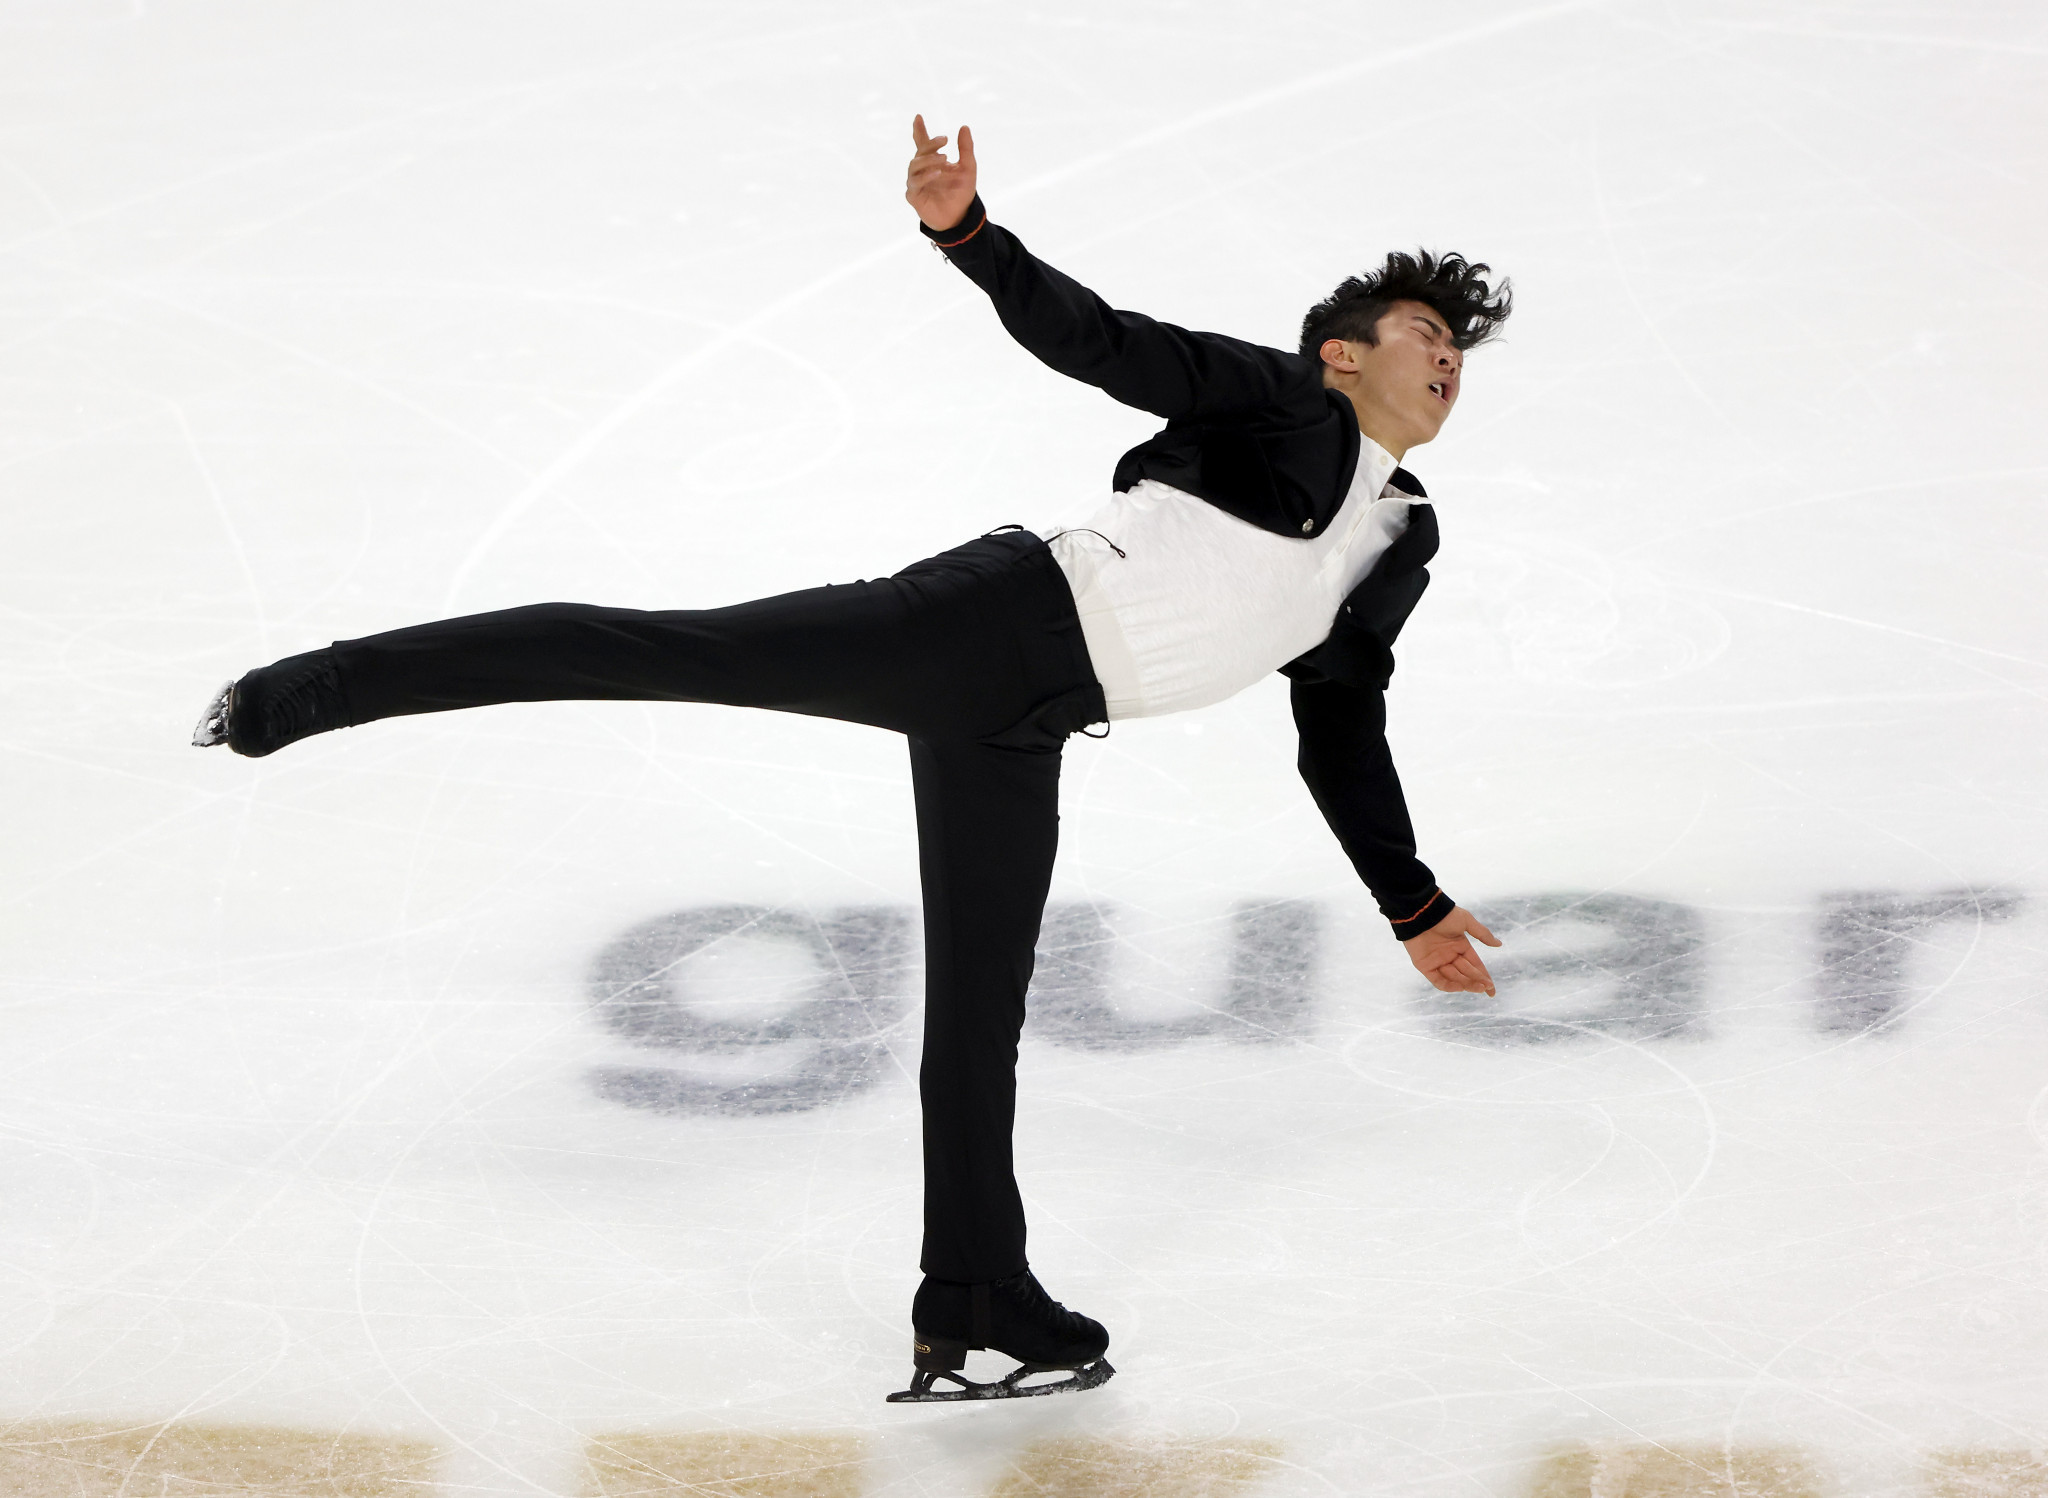 Nathan Chen returned to action by winning Skate America last month ©Getty Images